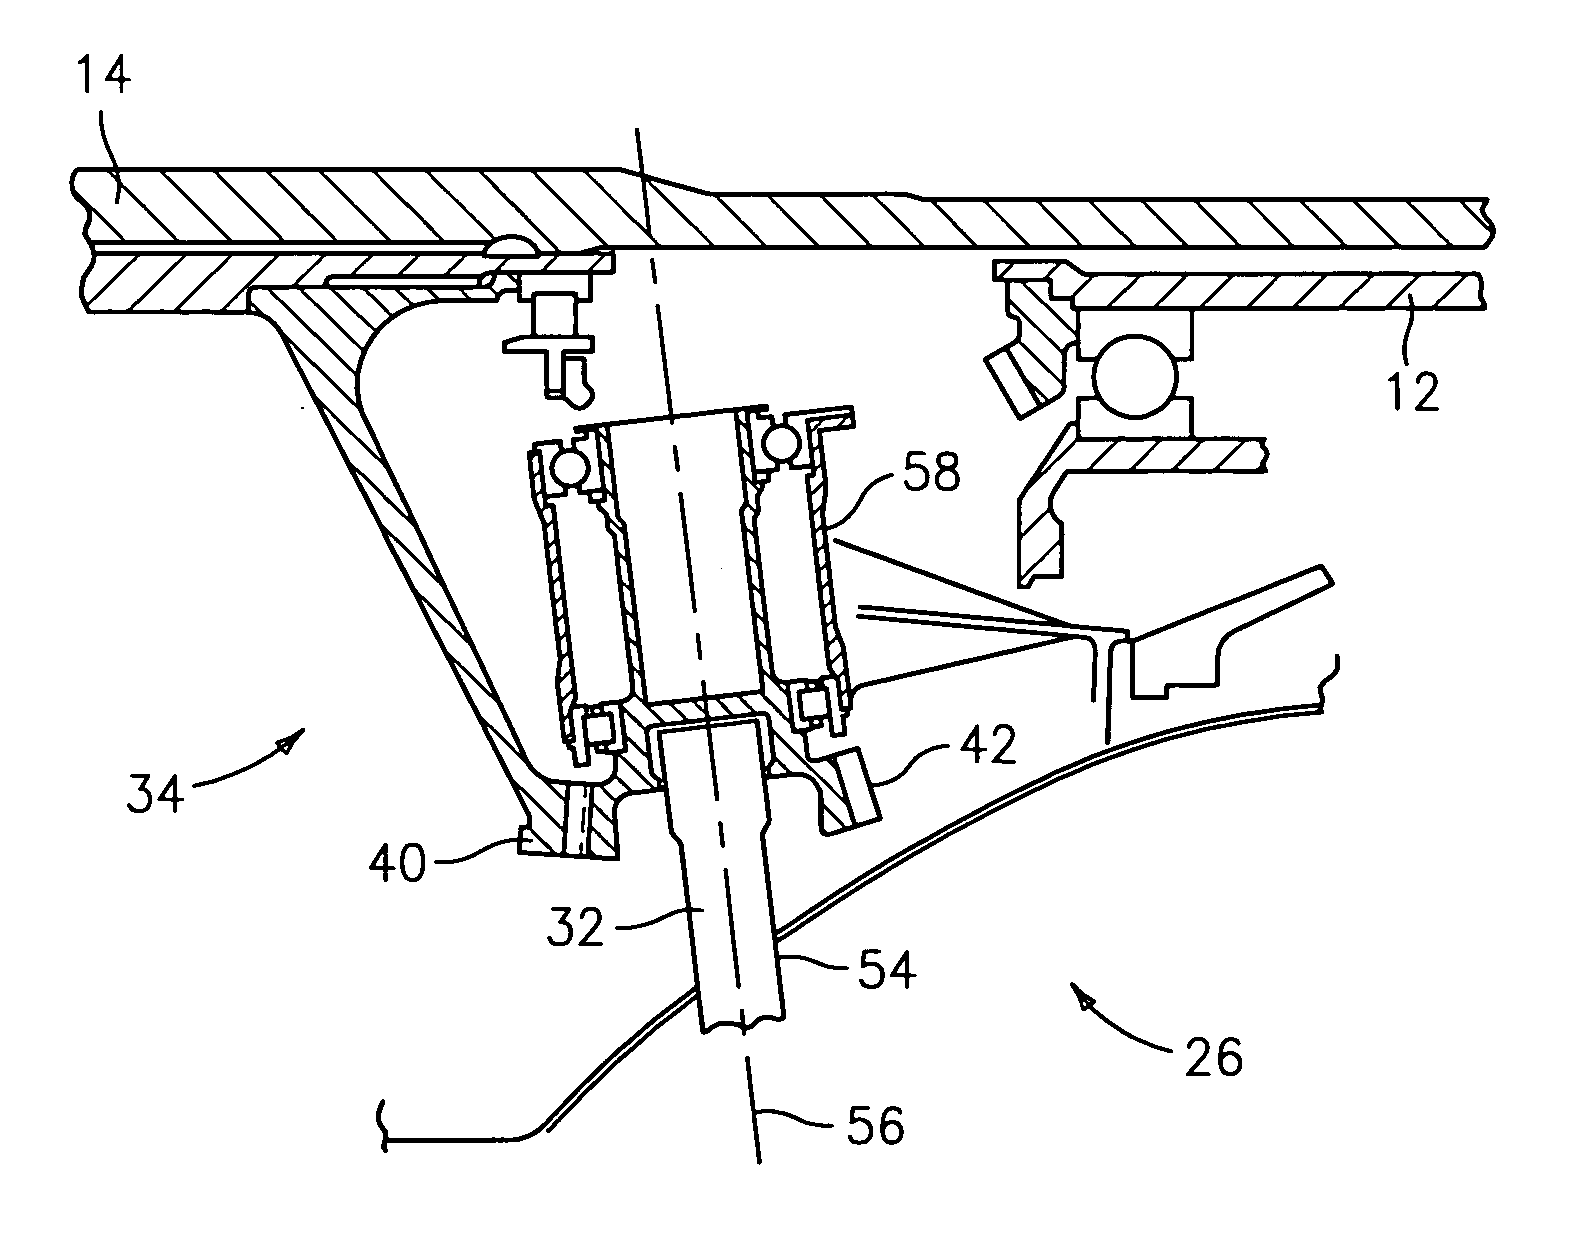 Apparatus for driving an accessory gearbox in a gas turbine engine